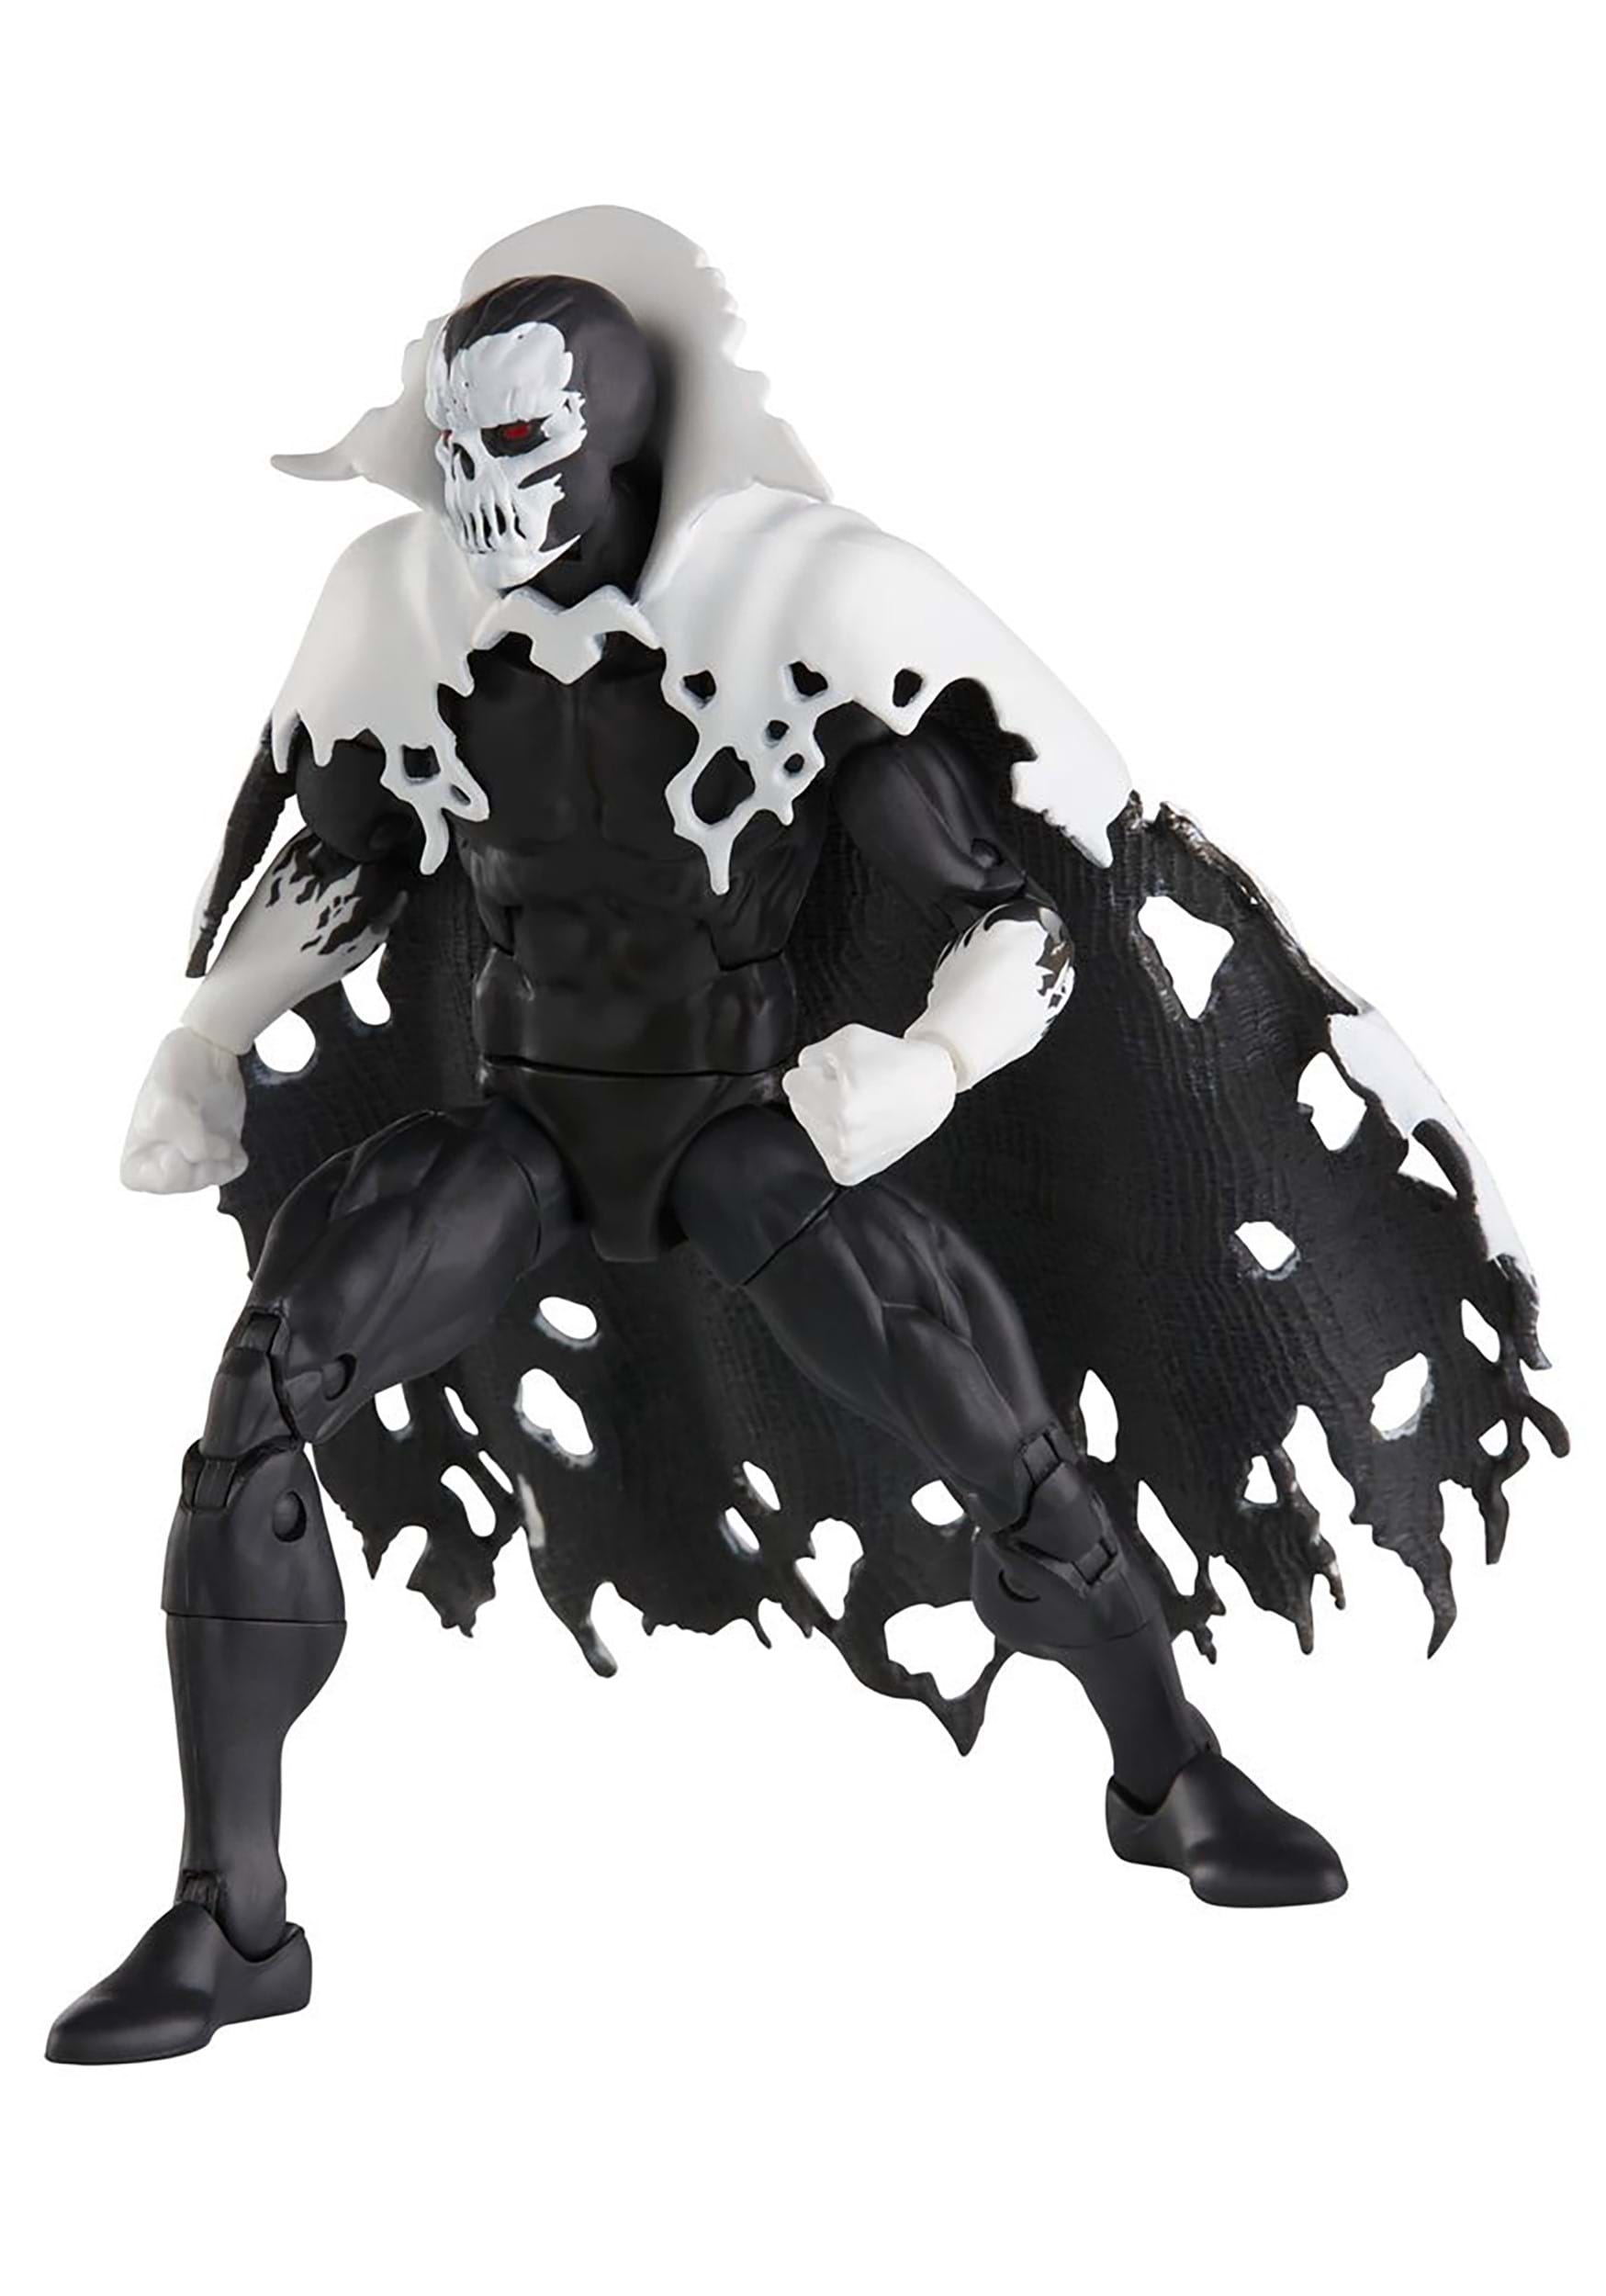 Doctor Strange in the Multiverse of Madness Marvel Legends 6-Inch D’Spayre Action Figure